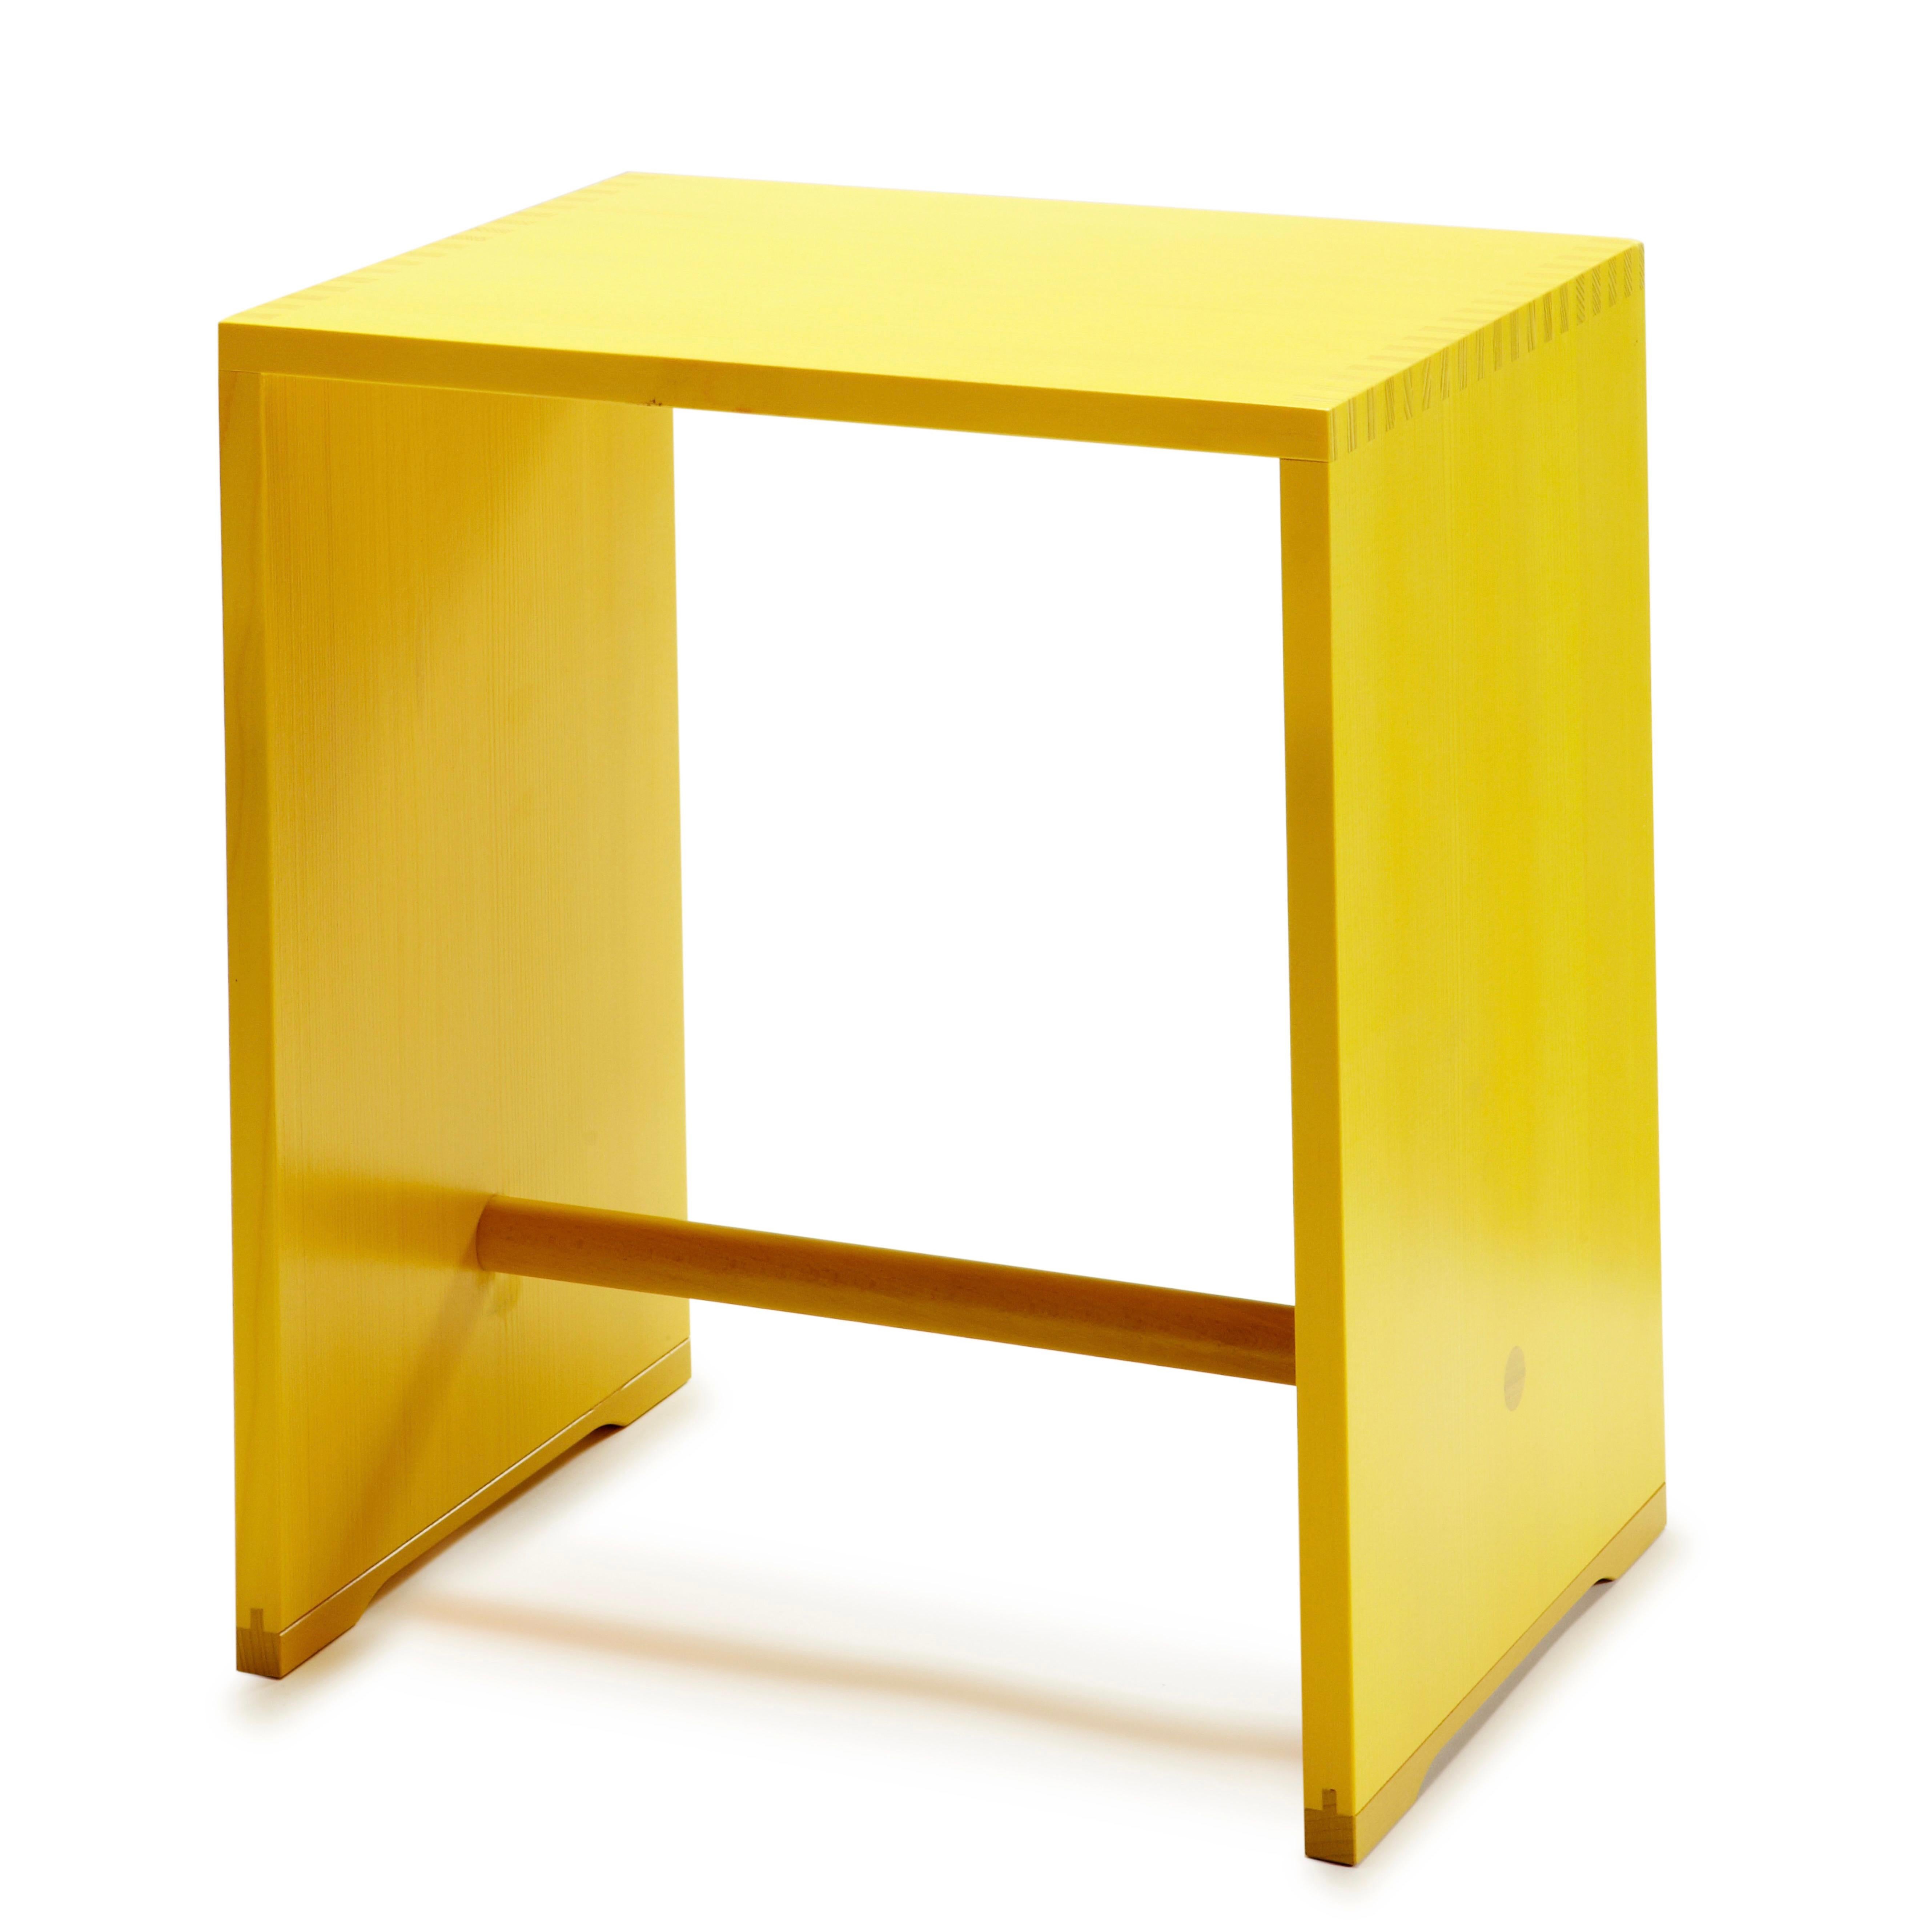 The Ulm Stool (German: Ulmer Hocker), a timeless masterpiece of Mid-Century Modern design, was created in 1954 by Max Bill, the first rector of the renowned Ulm School of Design, shortly known as HfG (German: Ulmer Hochschule für Gestaltung), in